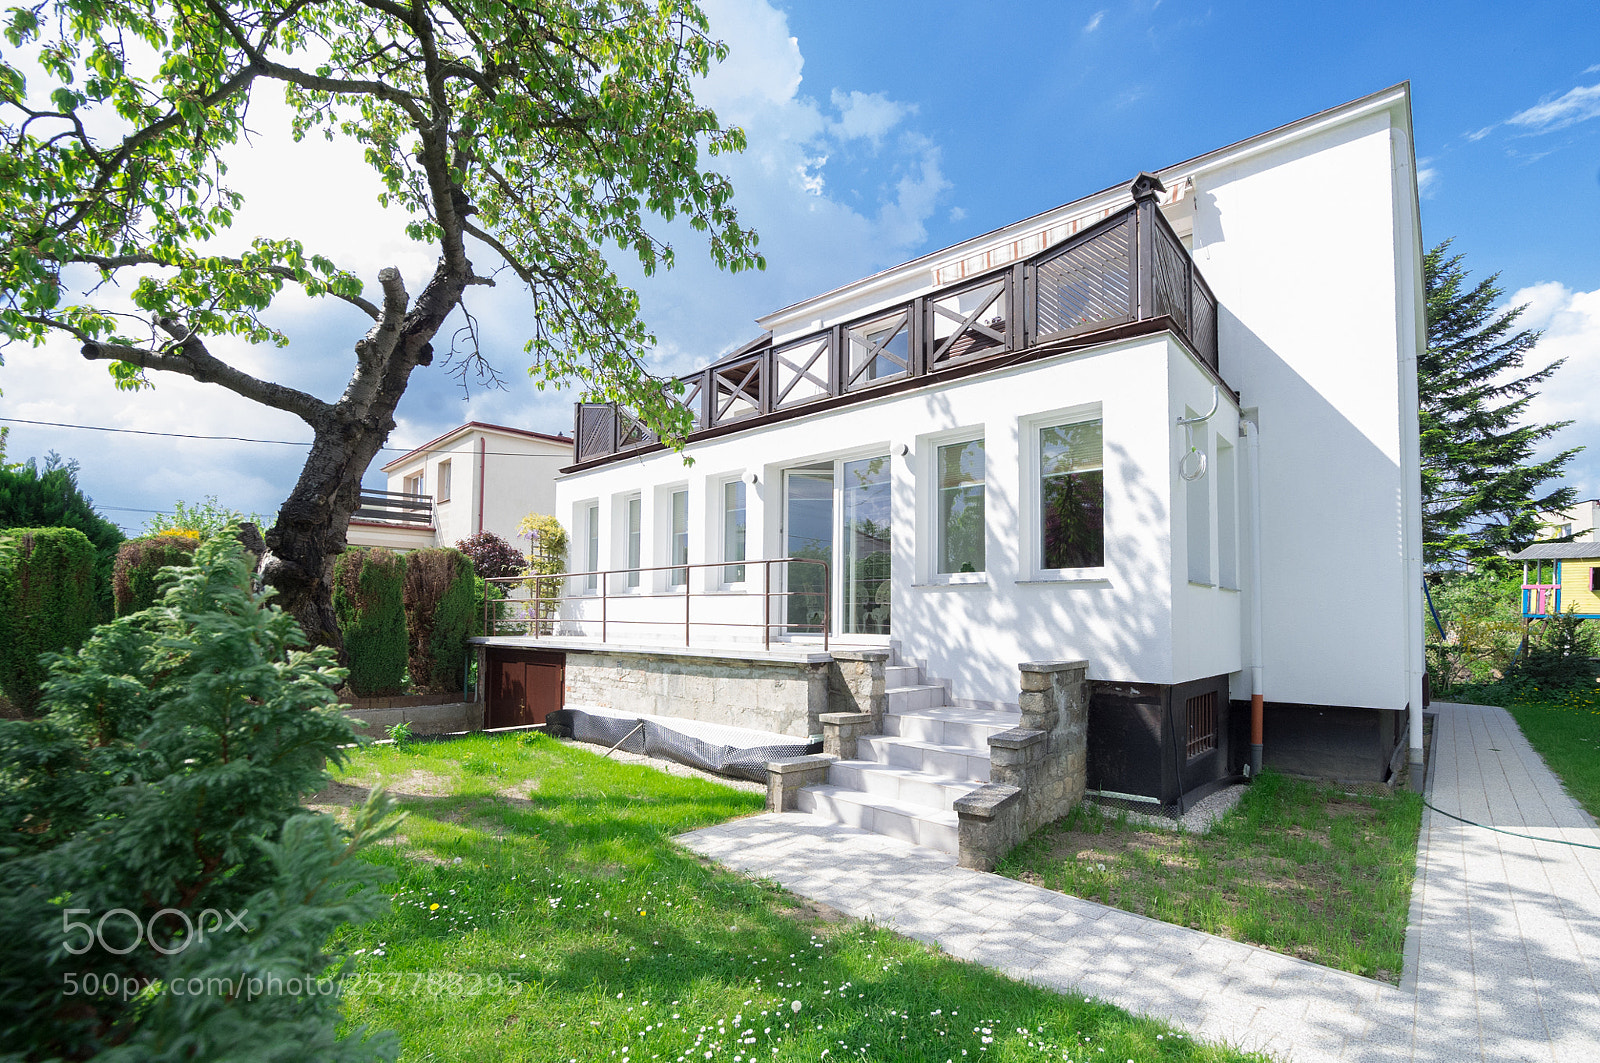 Pentax K-r sample photo. House for sale gdynia photography